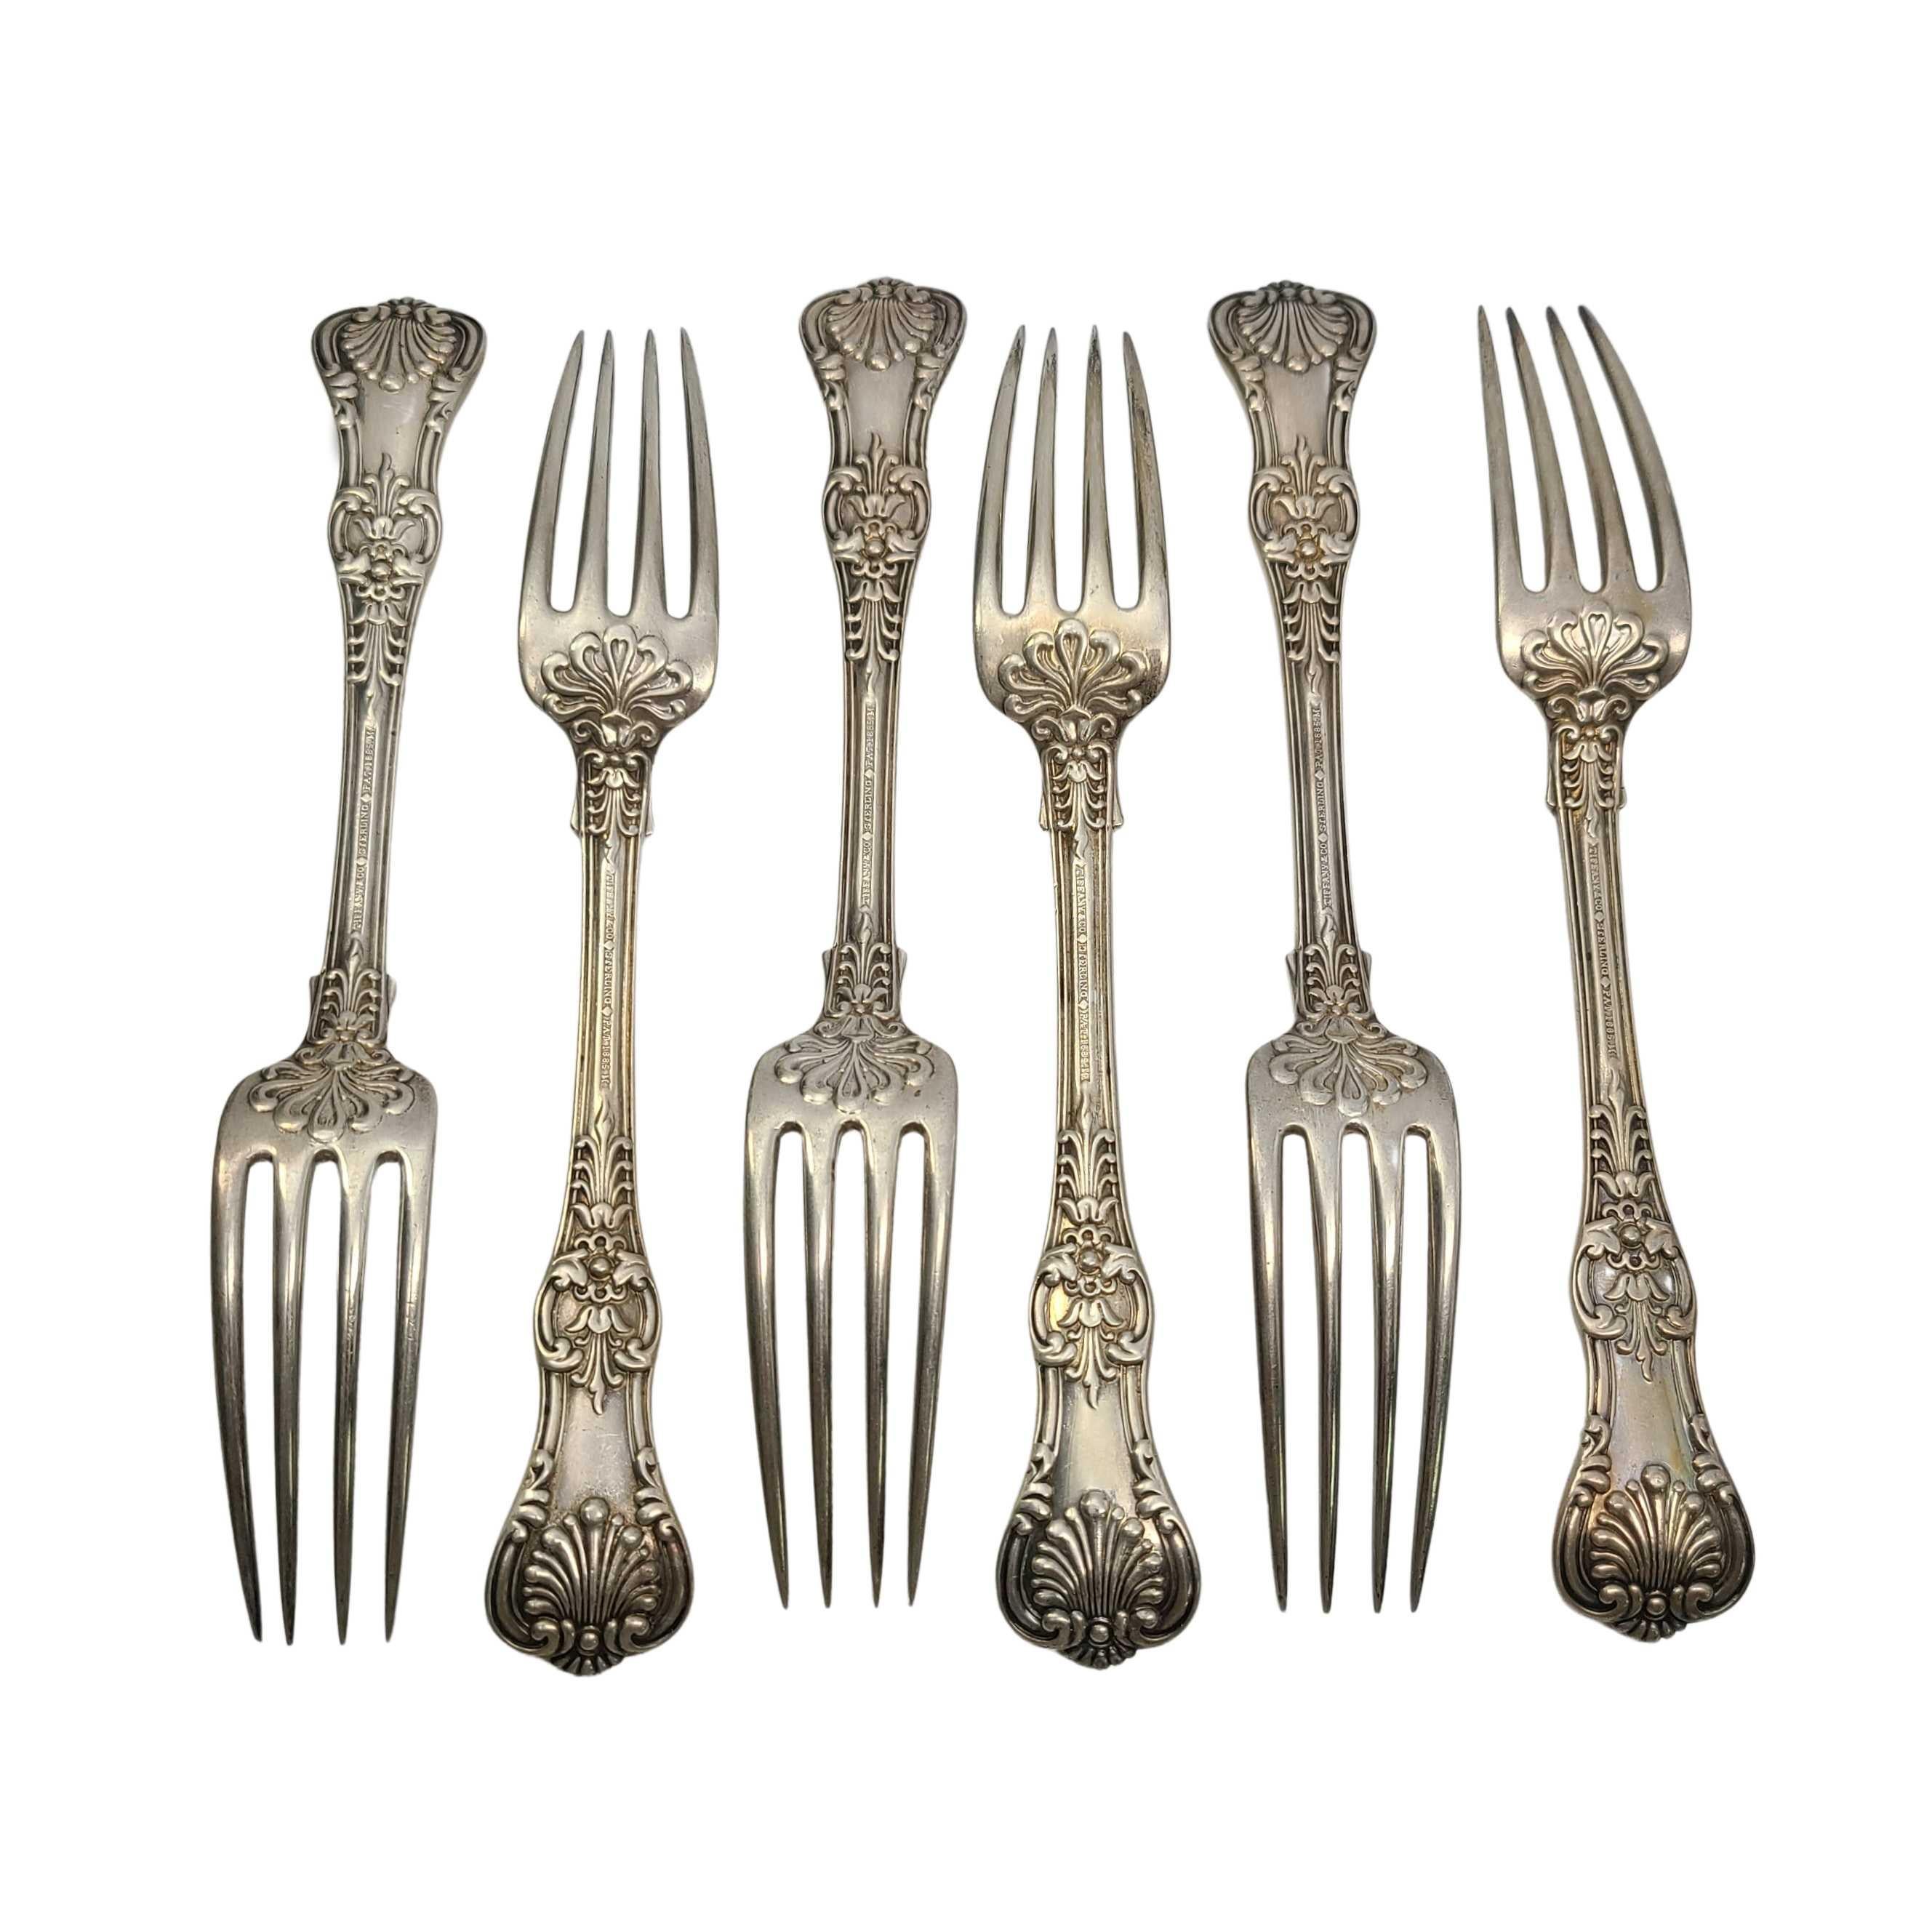 Set of 6 antique sterling silver forks by Tiffany & Co in the English King pattern.

No monogram.

Beautiful dinner forks in Tiffany's intricate and decorative version of a King pattern which were very popular in the late 19th century. The M